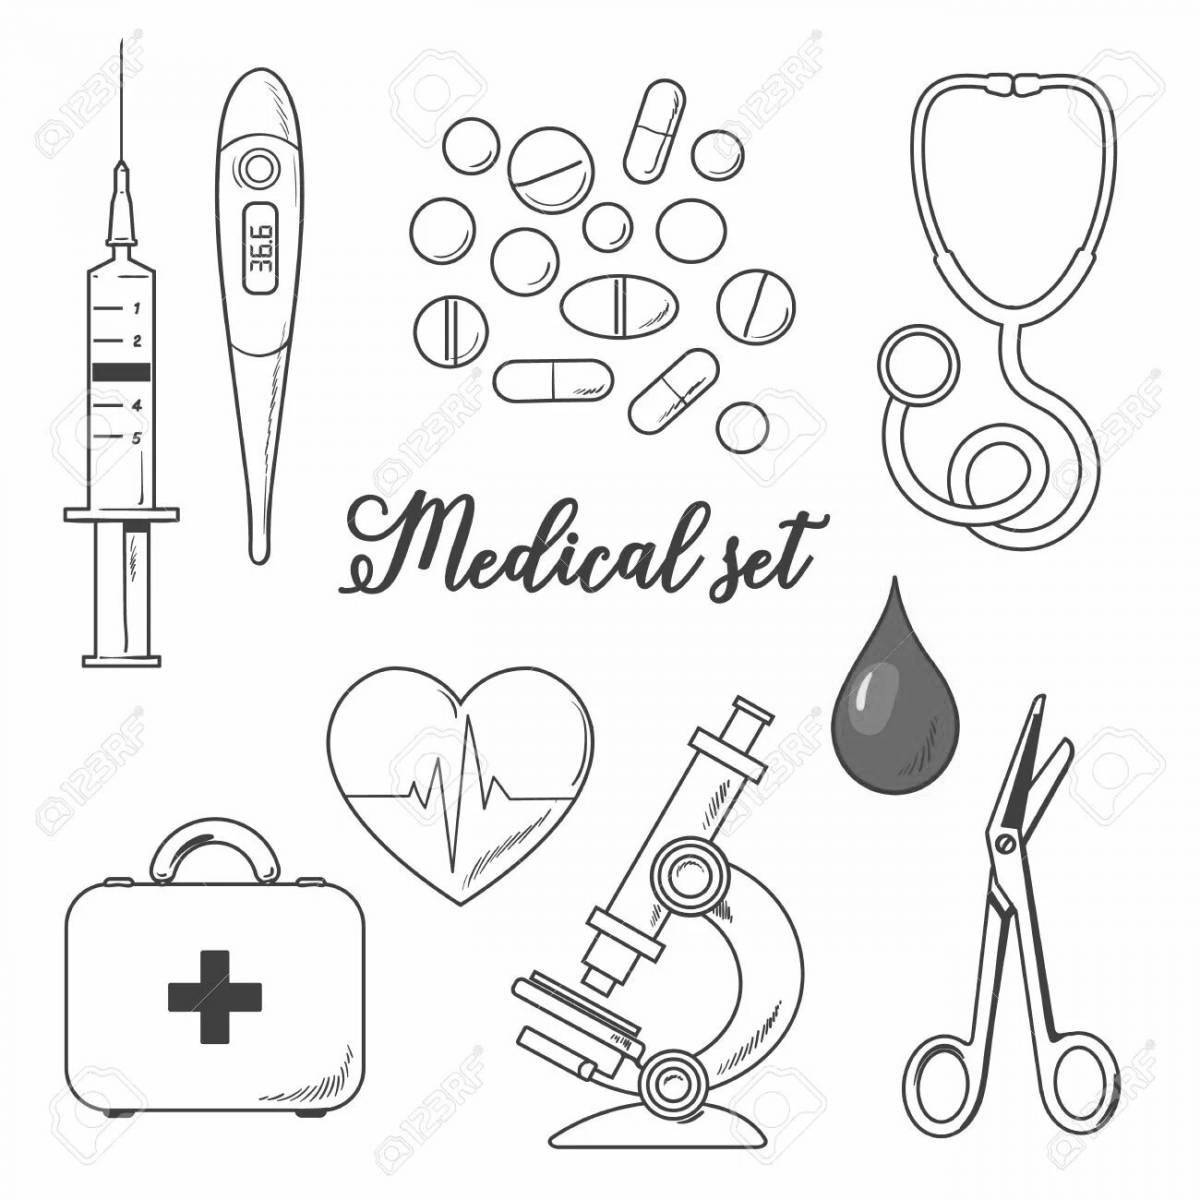 Playful coloring page of medical instruments